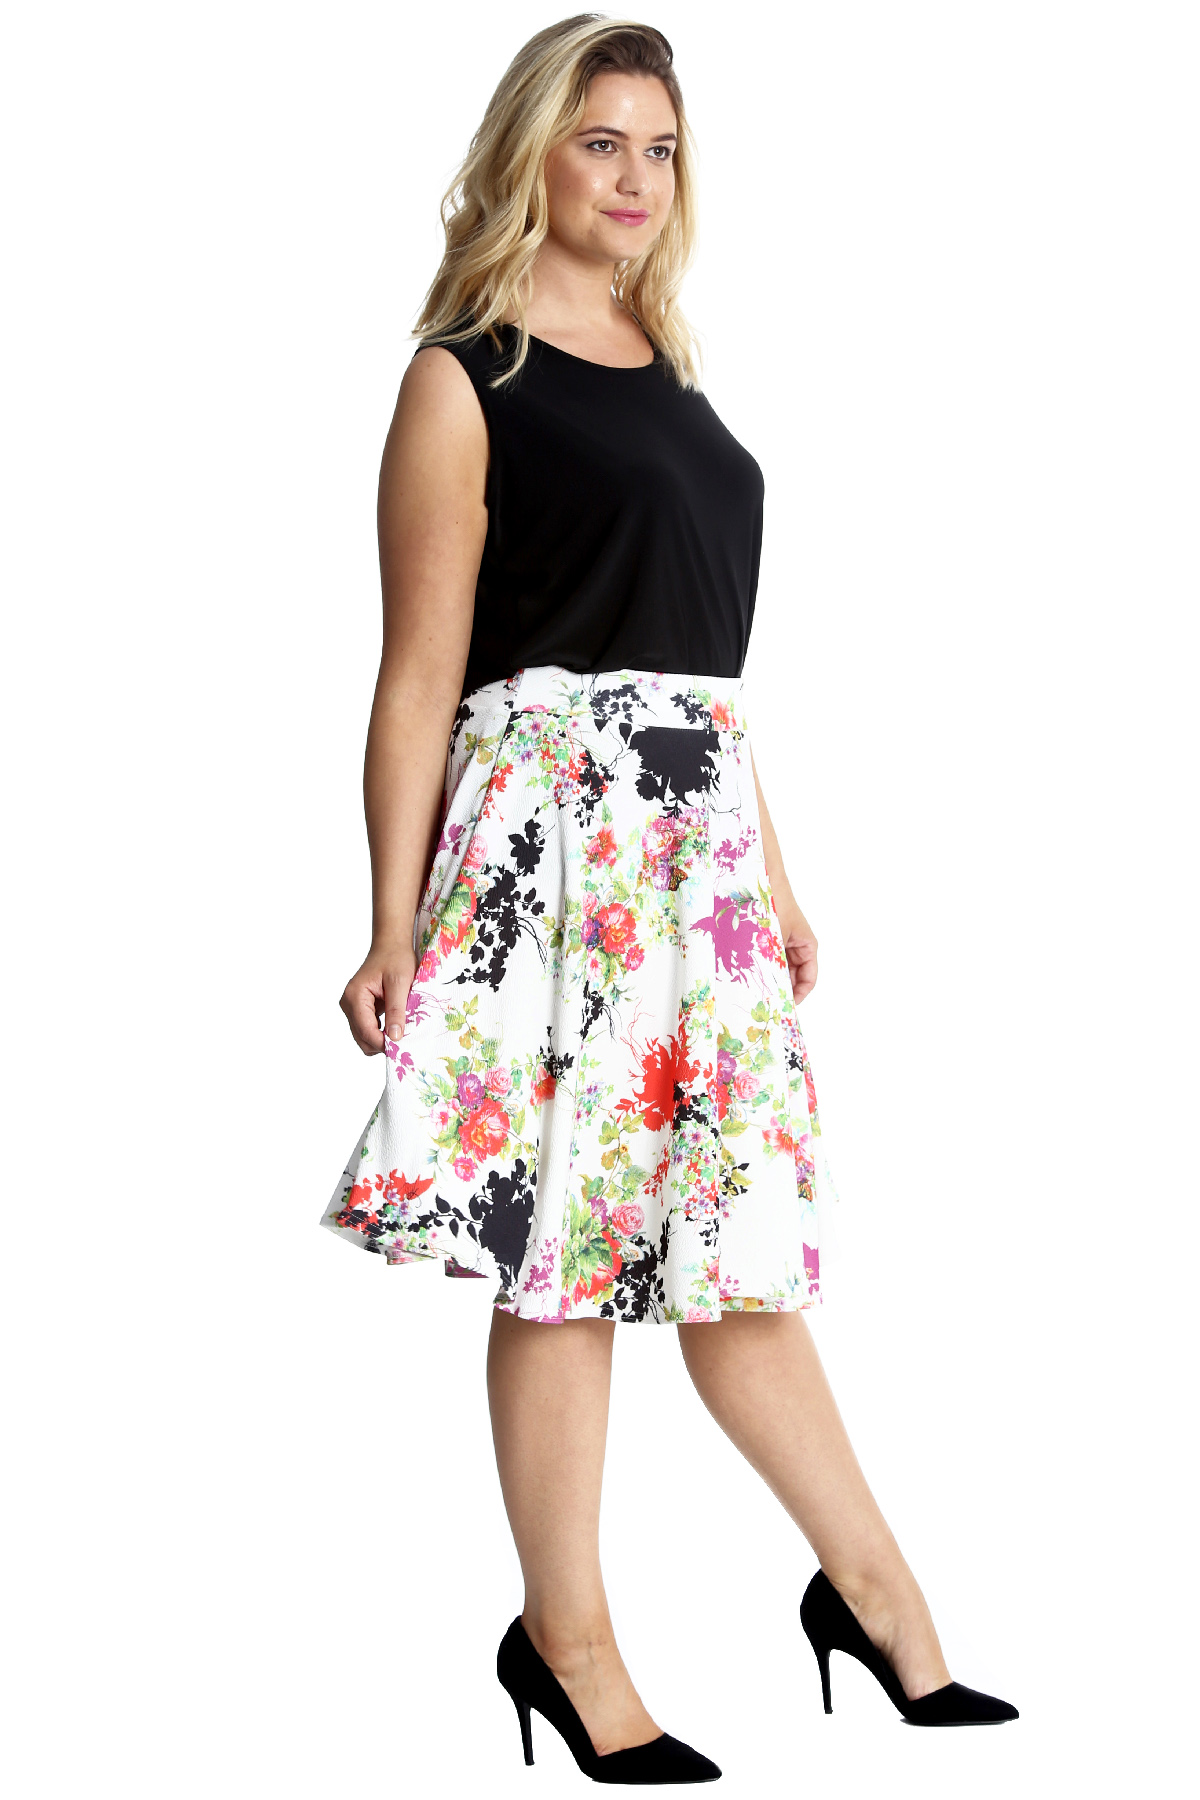 New Ladies Skirts Plus Size Womens Floral Print Skater Knee Long Crepe ...